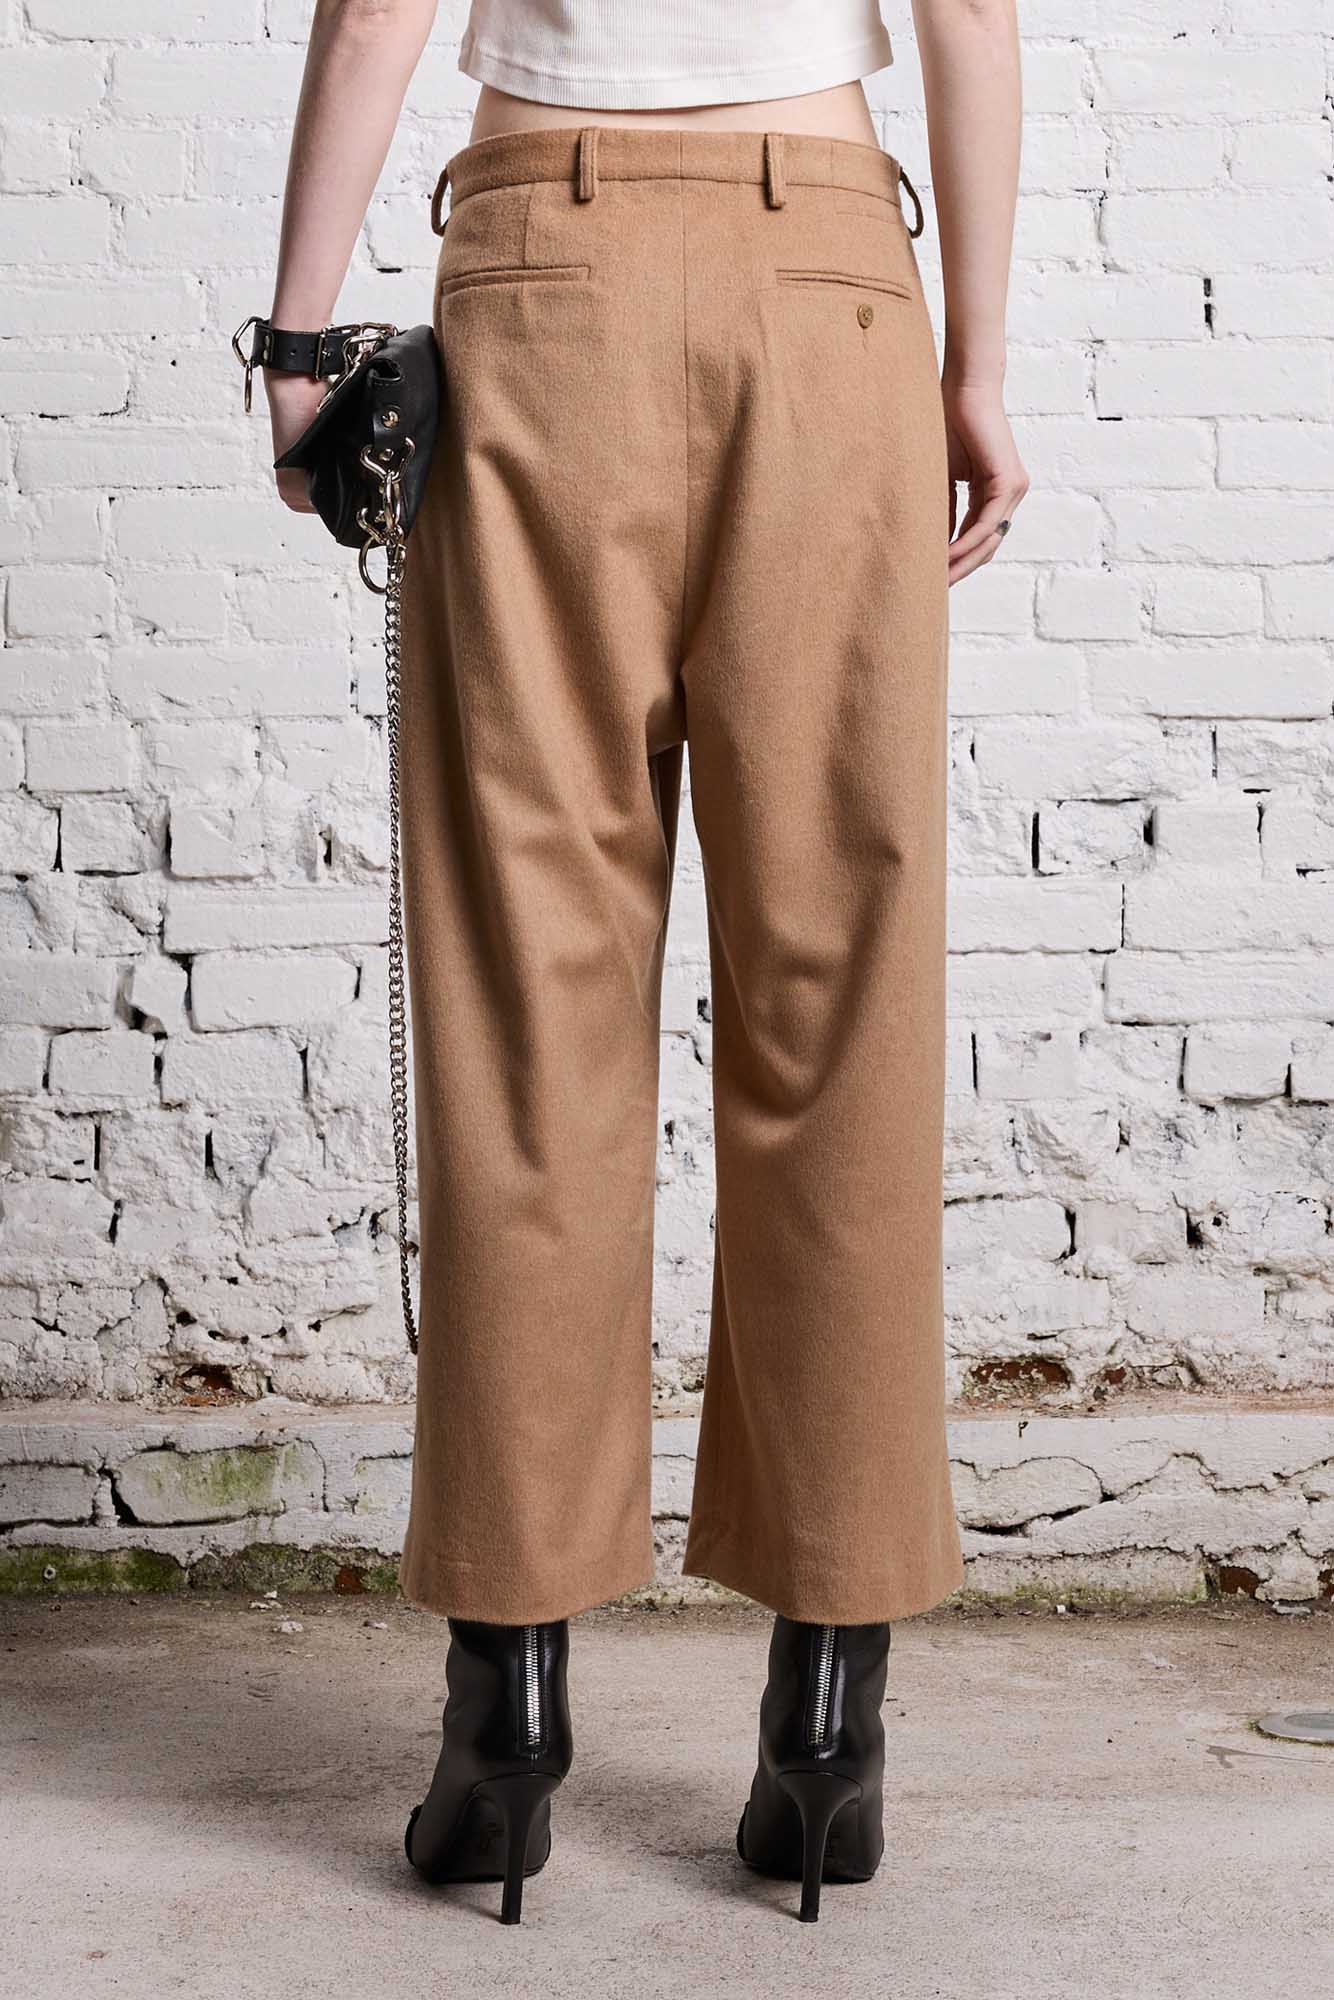 ARTICULATED KNEE TROUSER - CAMEL